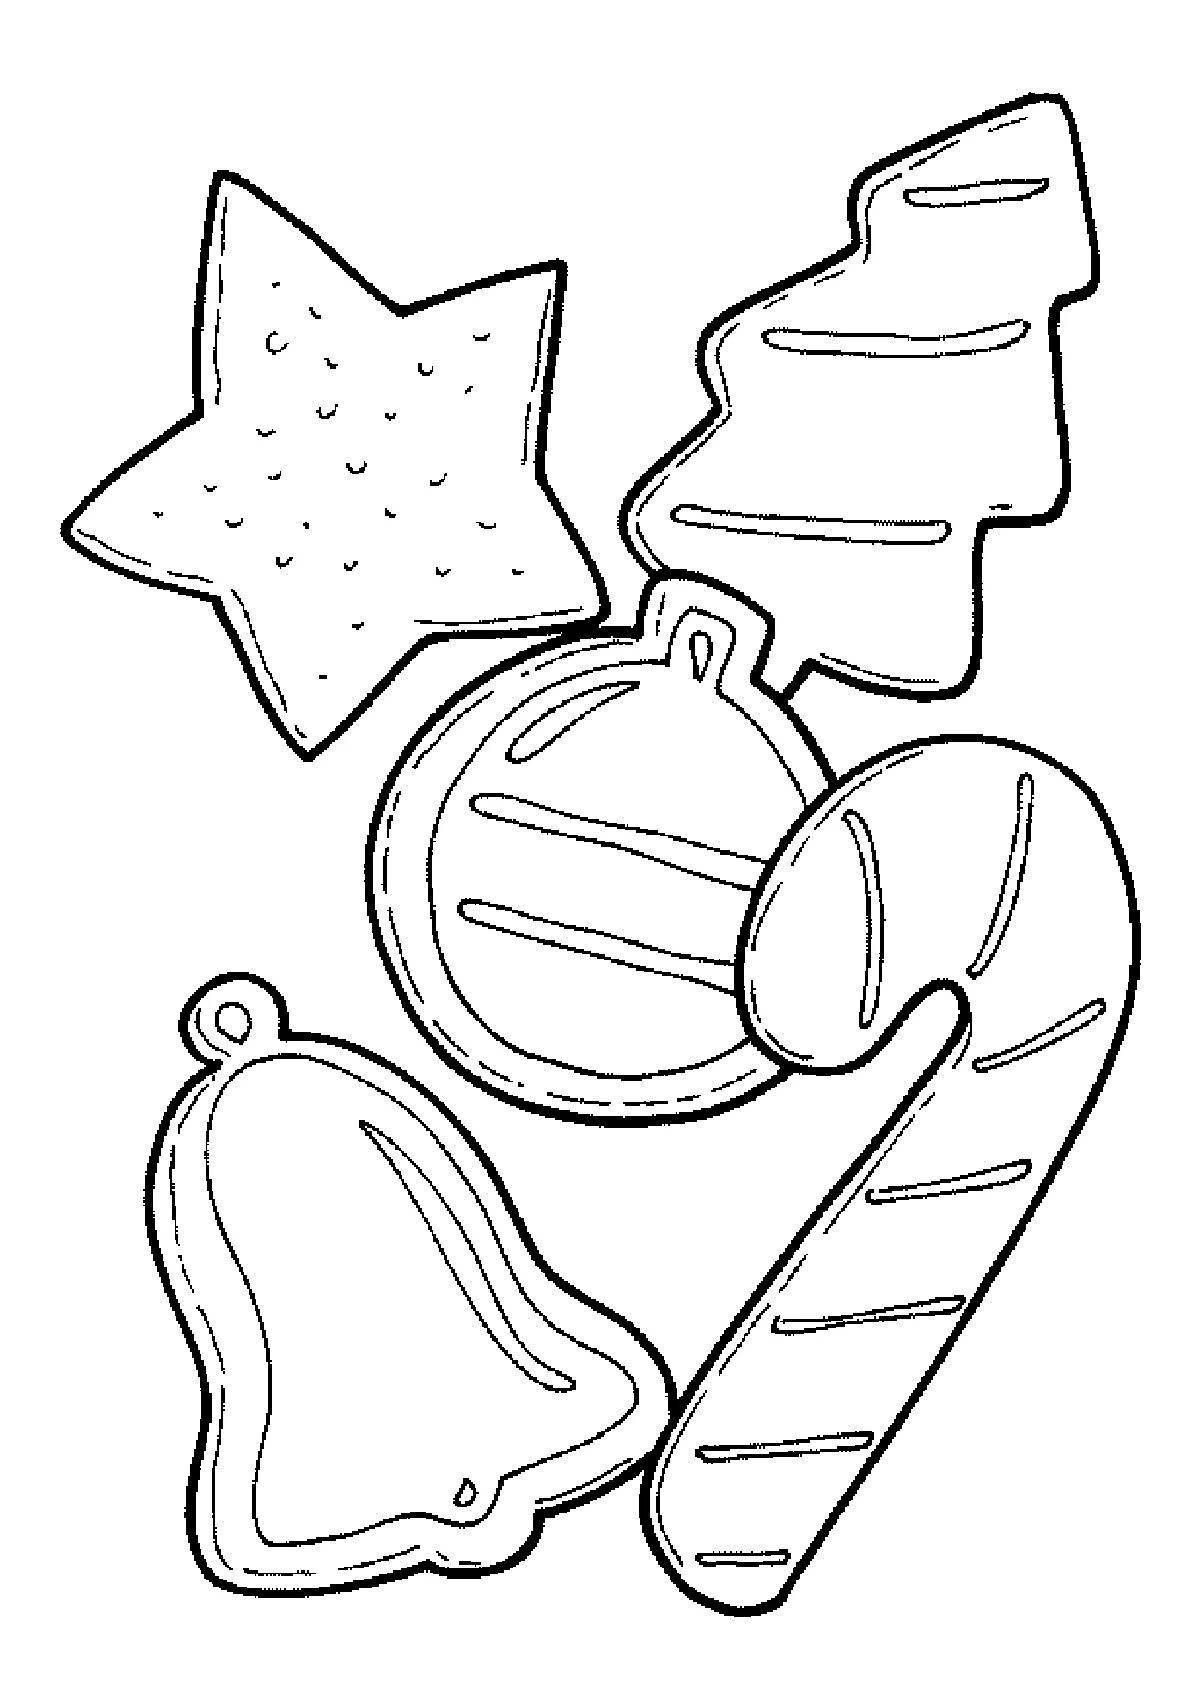 Coloring book of fascinating Christmas decorations